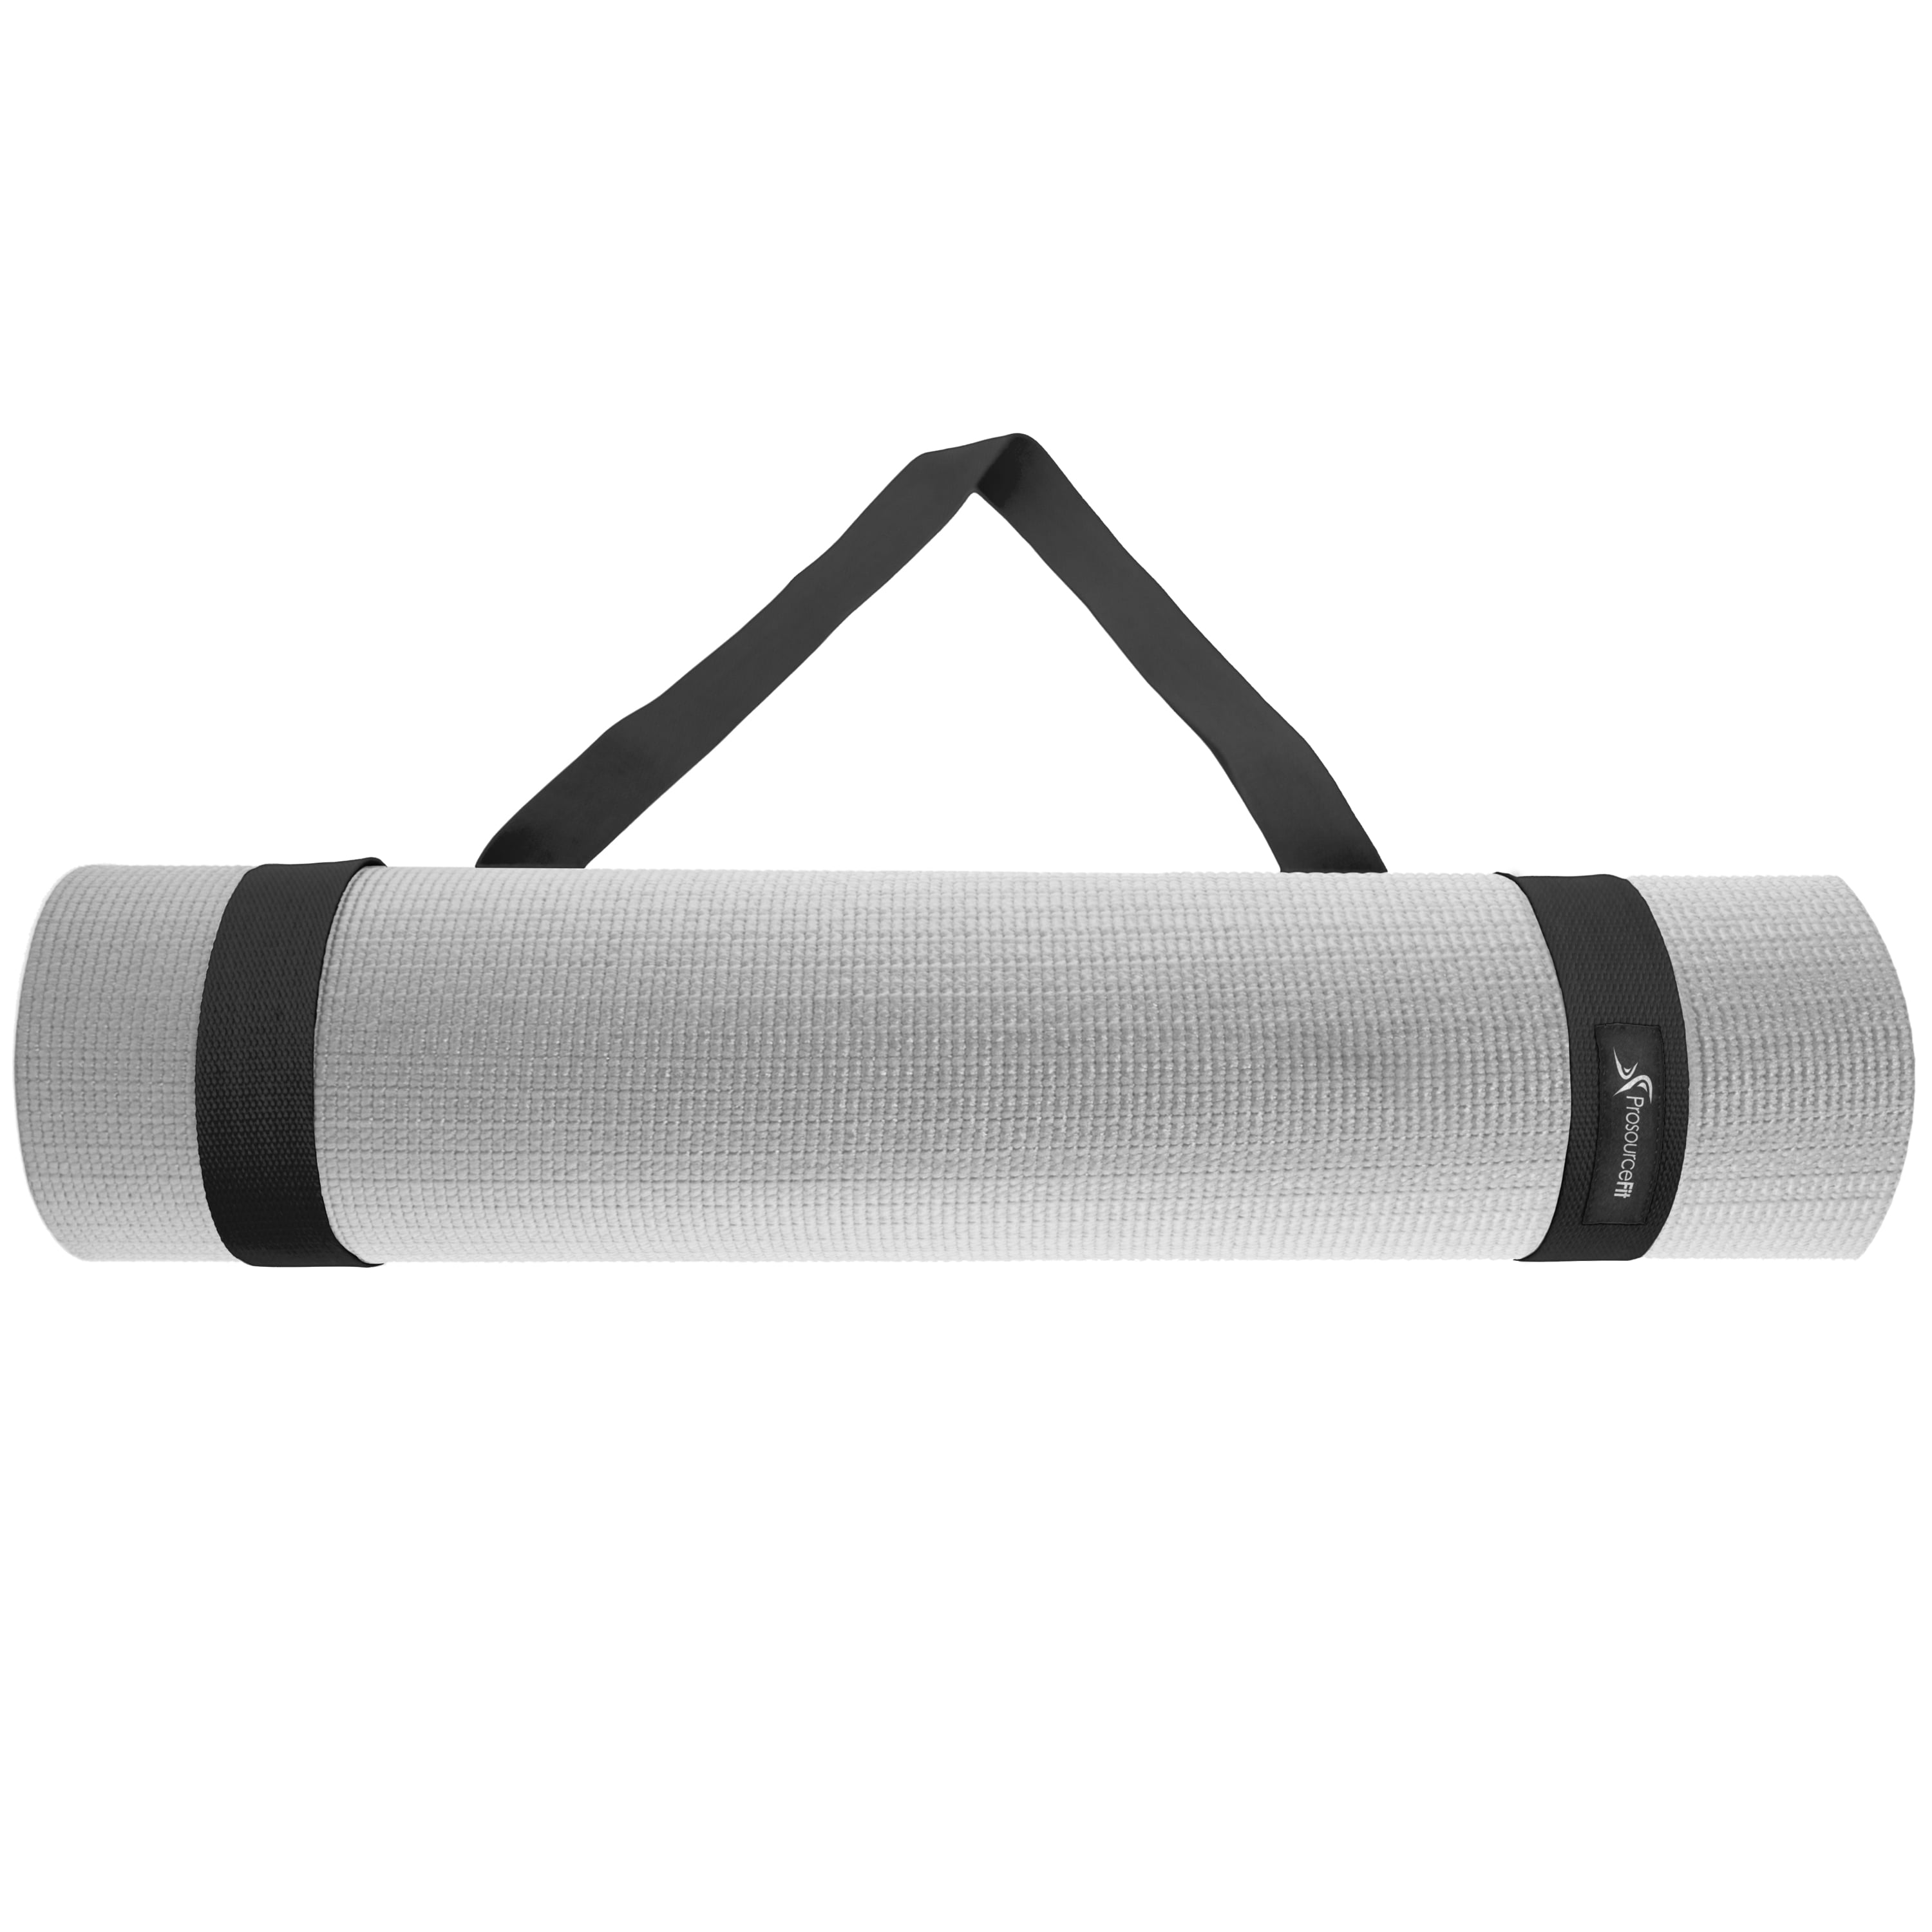 Easy-Cinch Yoga Mat Sling Adjustable and Durable Yoga Mat Carrier & Stretching Strap， The Must-Have Multi-Purpose Straps for Your Yoga Mat and Exercise Mat sur Yoga Mat Strap 5Colors